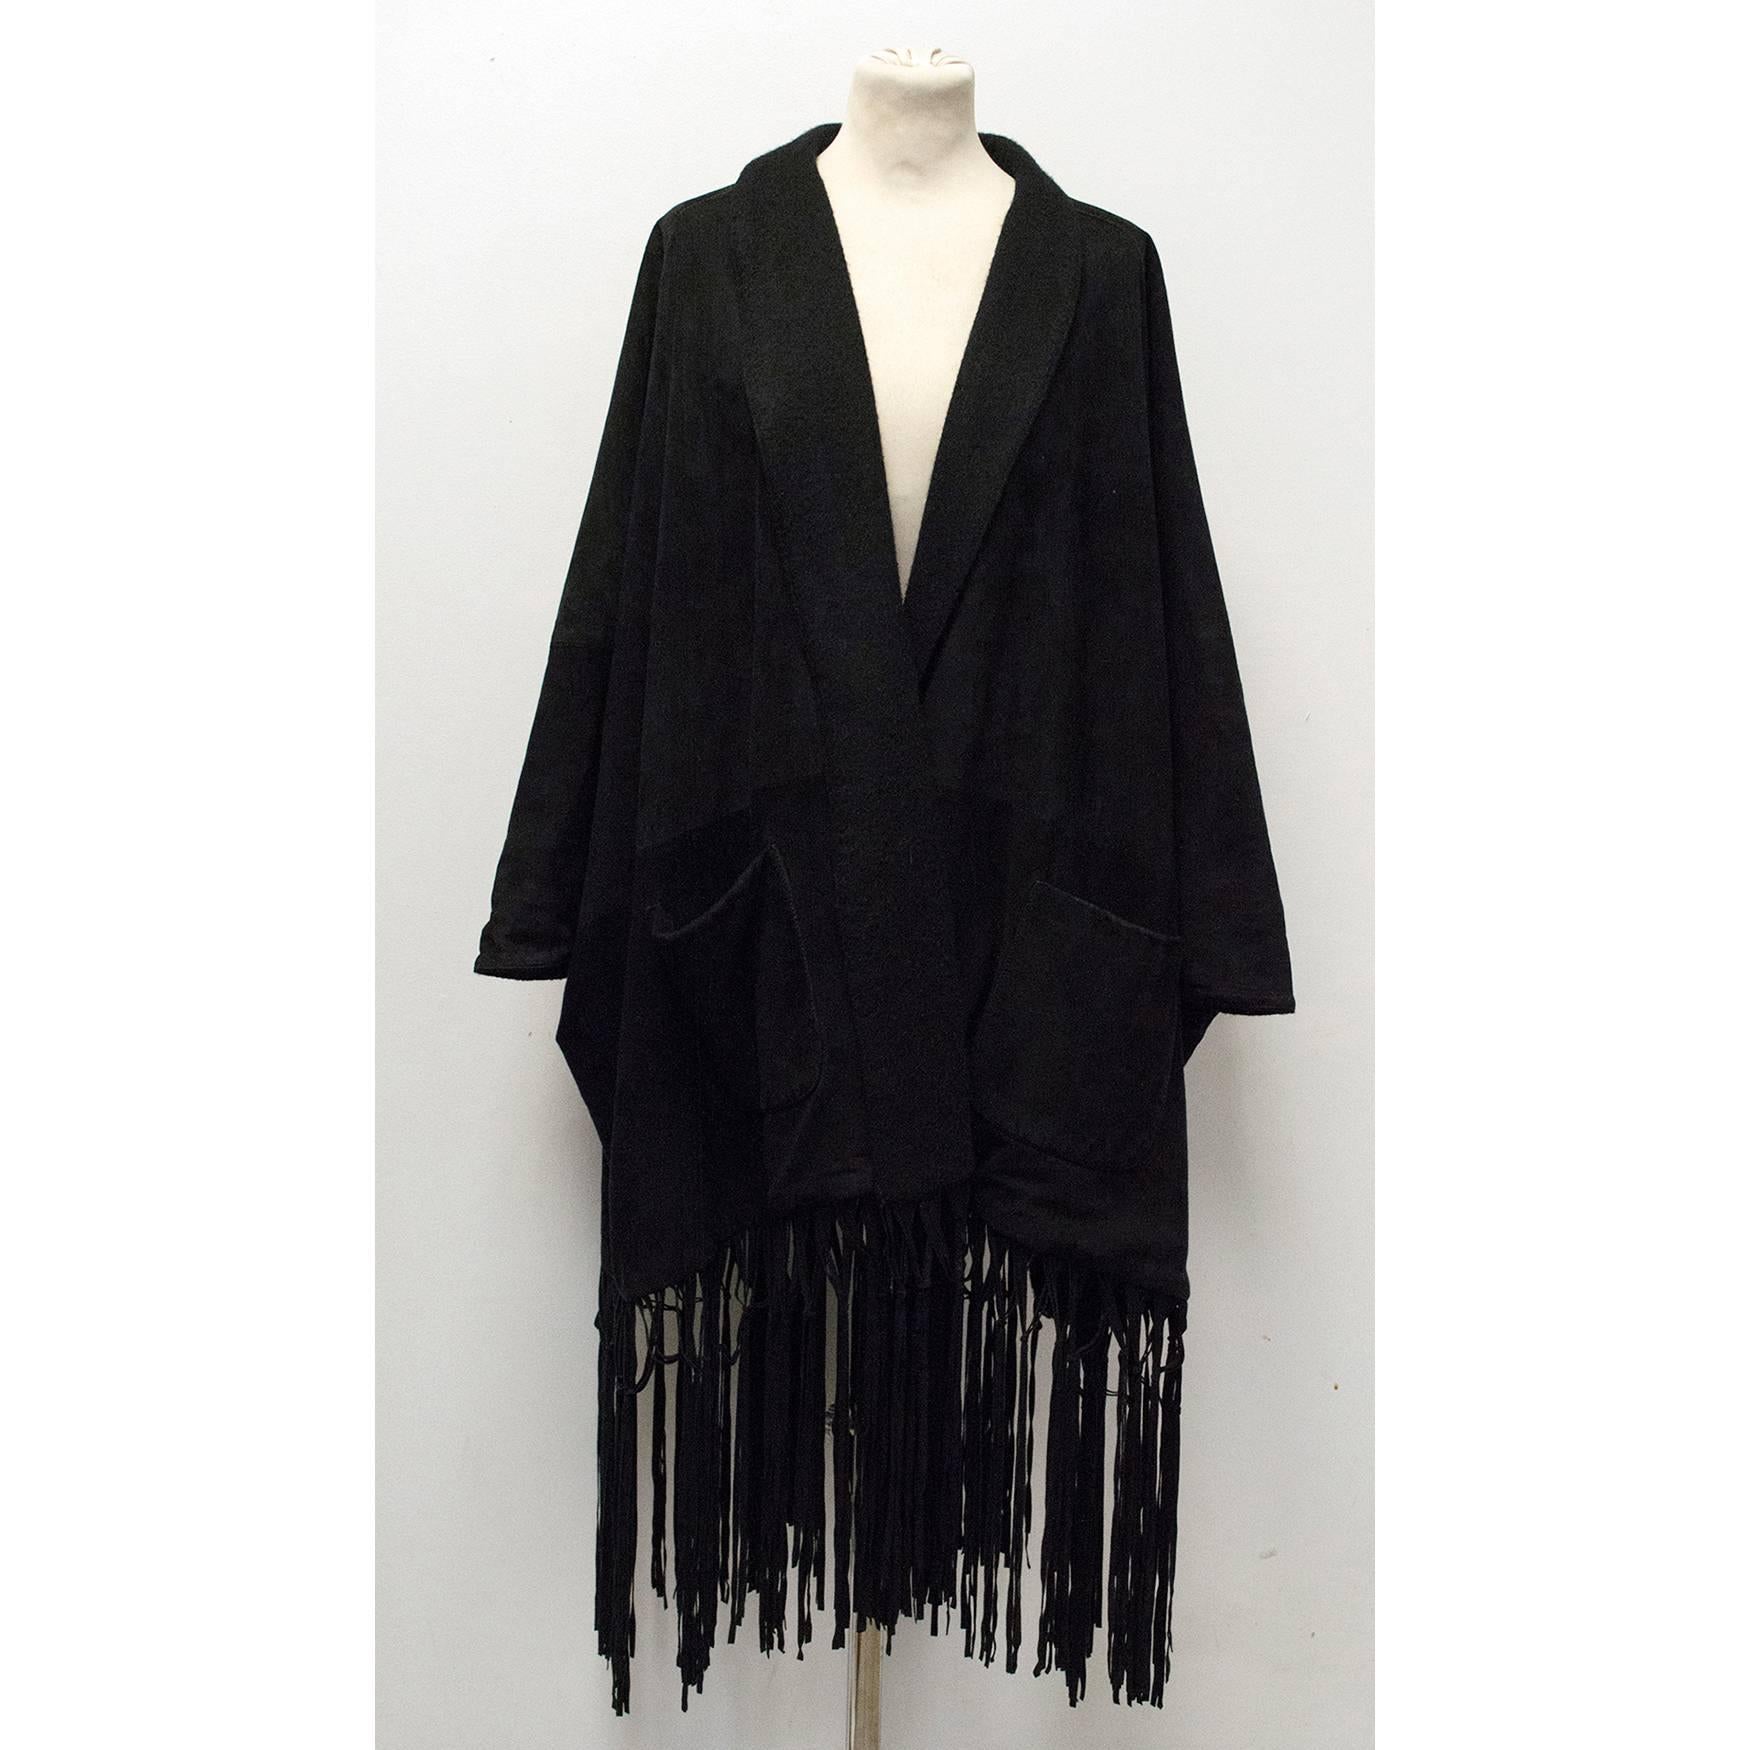 Loro Piana black suede coat with a cashmere shawl lapel, fringed hem and a cashmere lining. The coat is very soft to the touch and medium weight with a relaxed oversize fit and two large pockets on the front. Made in Italy. 

100% Suede with a 100%